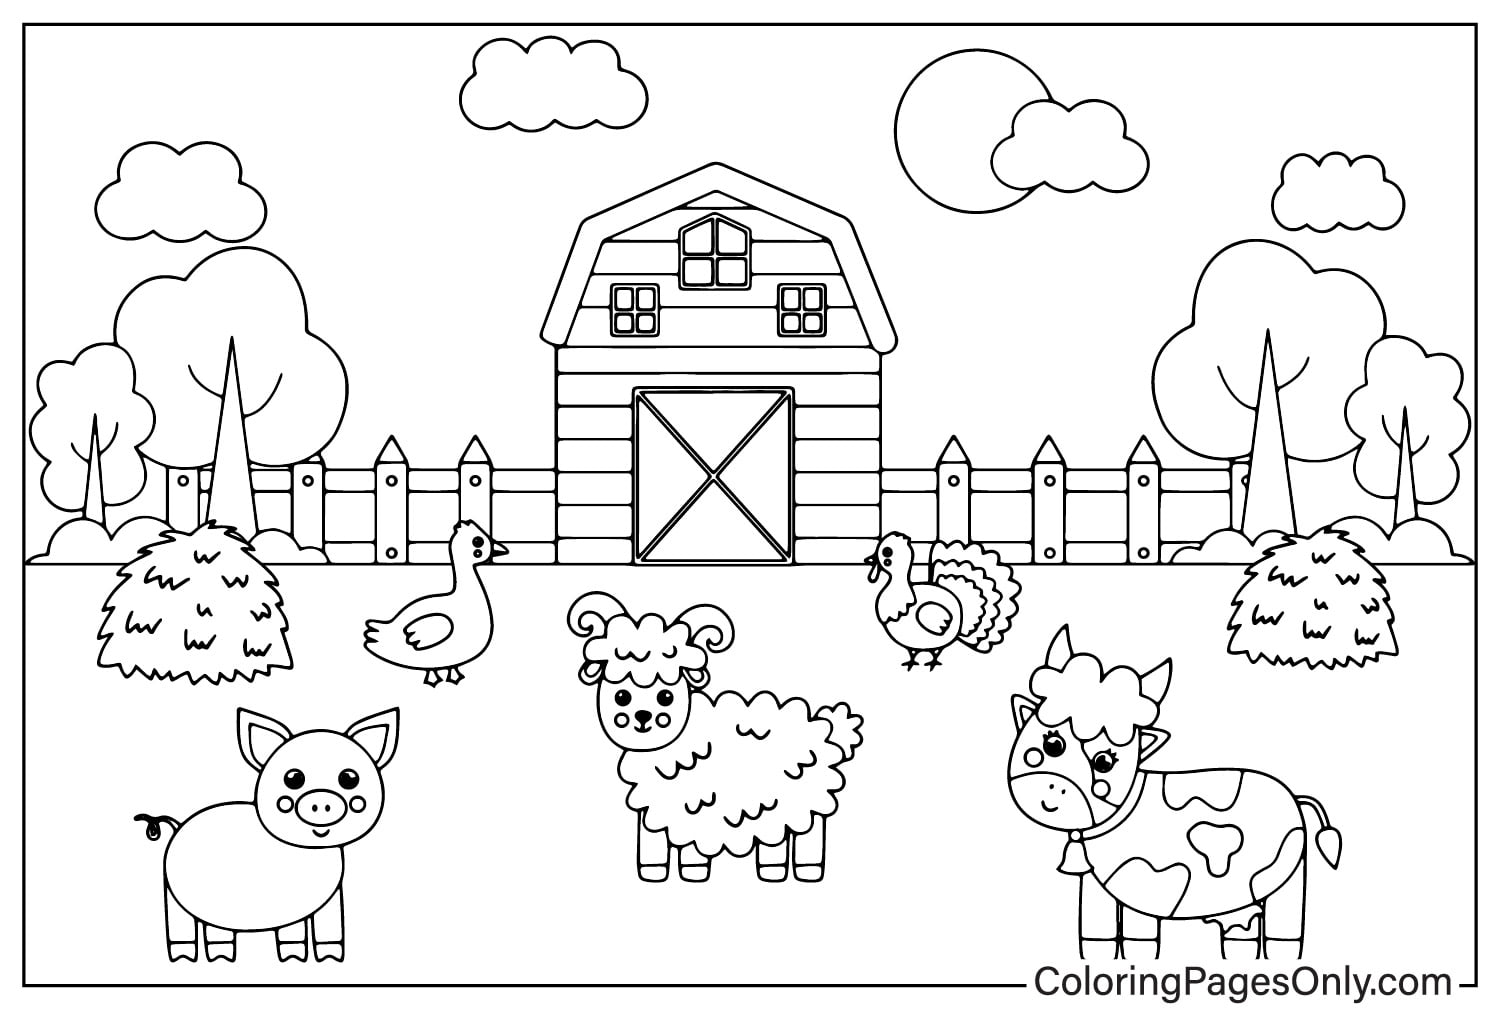 Animal Farm - Free Printable Coloring Pages